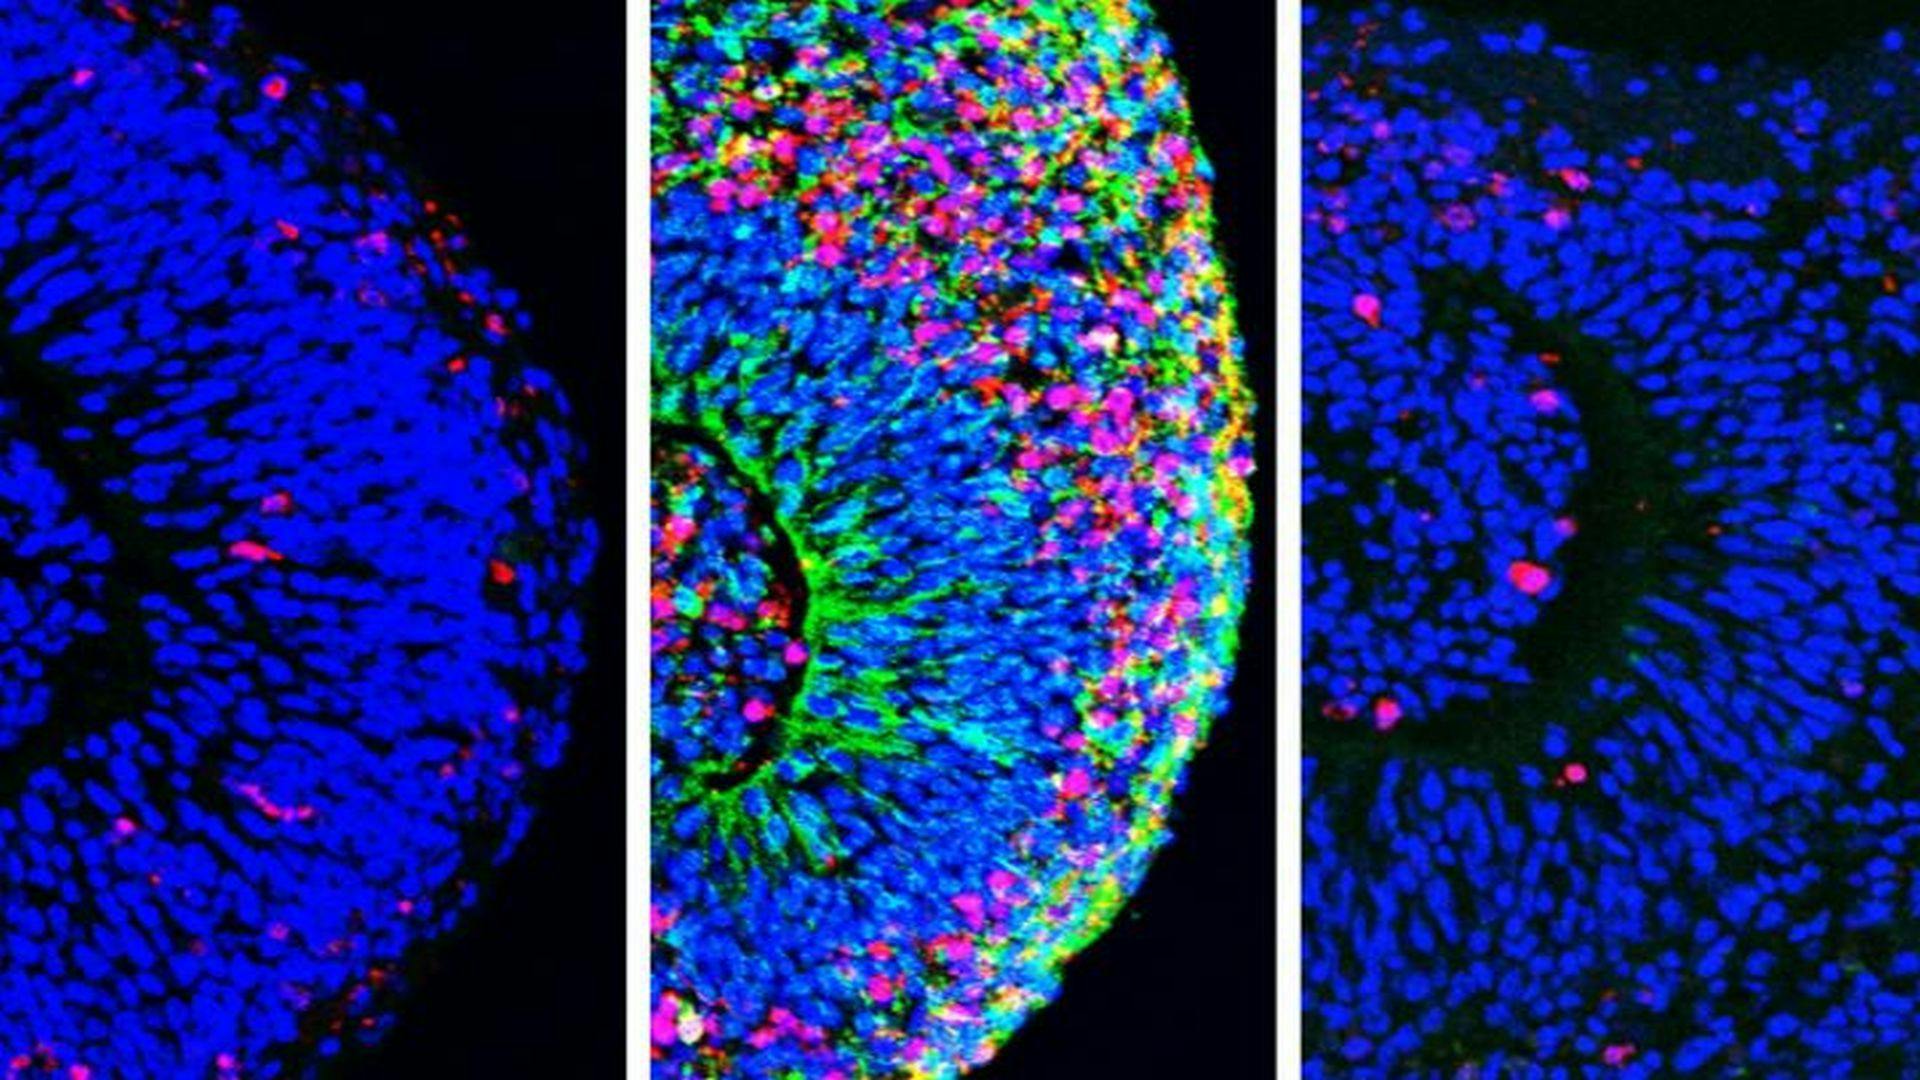 Better Organoids Could Help Scientists Identify Treatments for Zika-Related Brain Damage